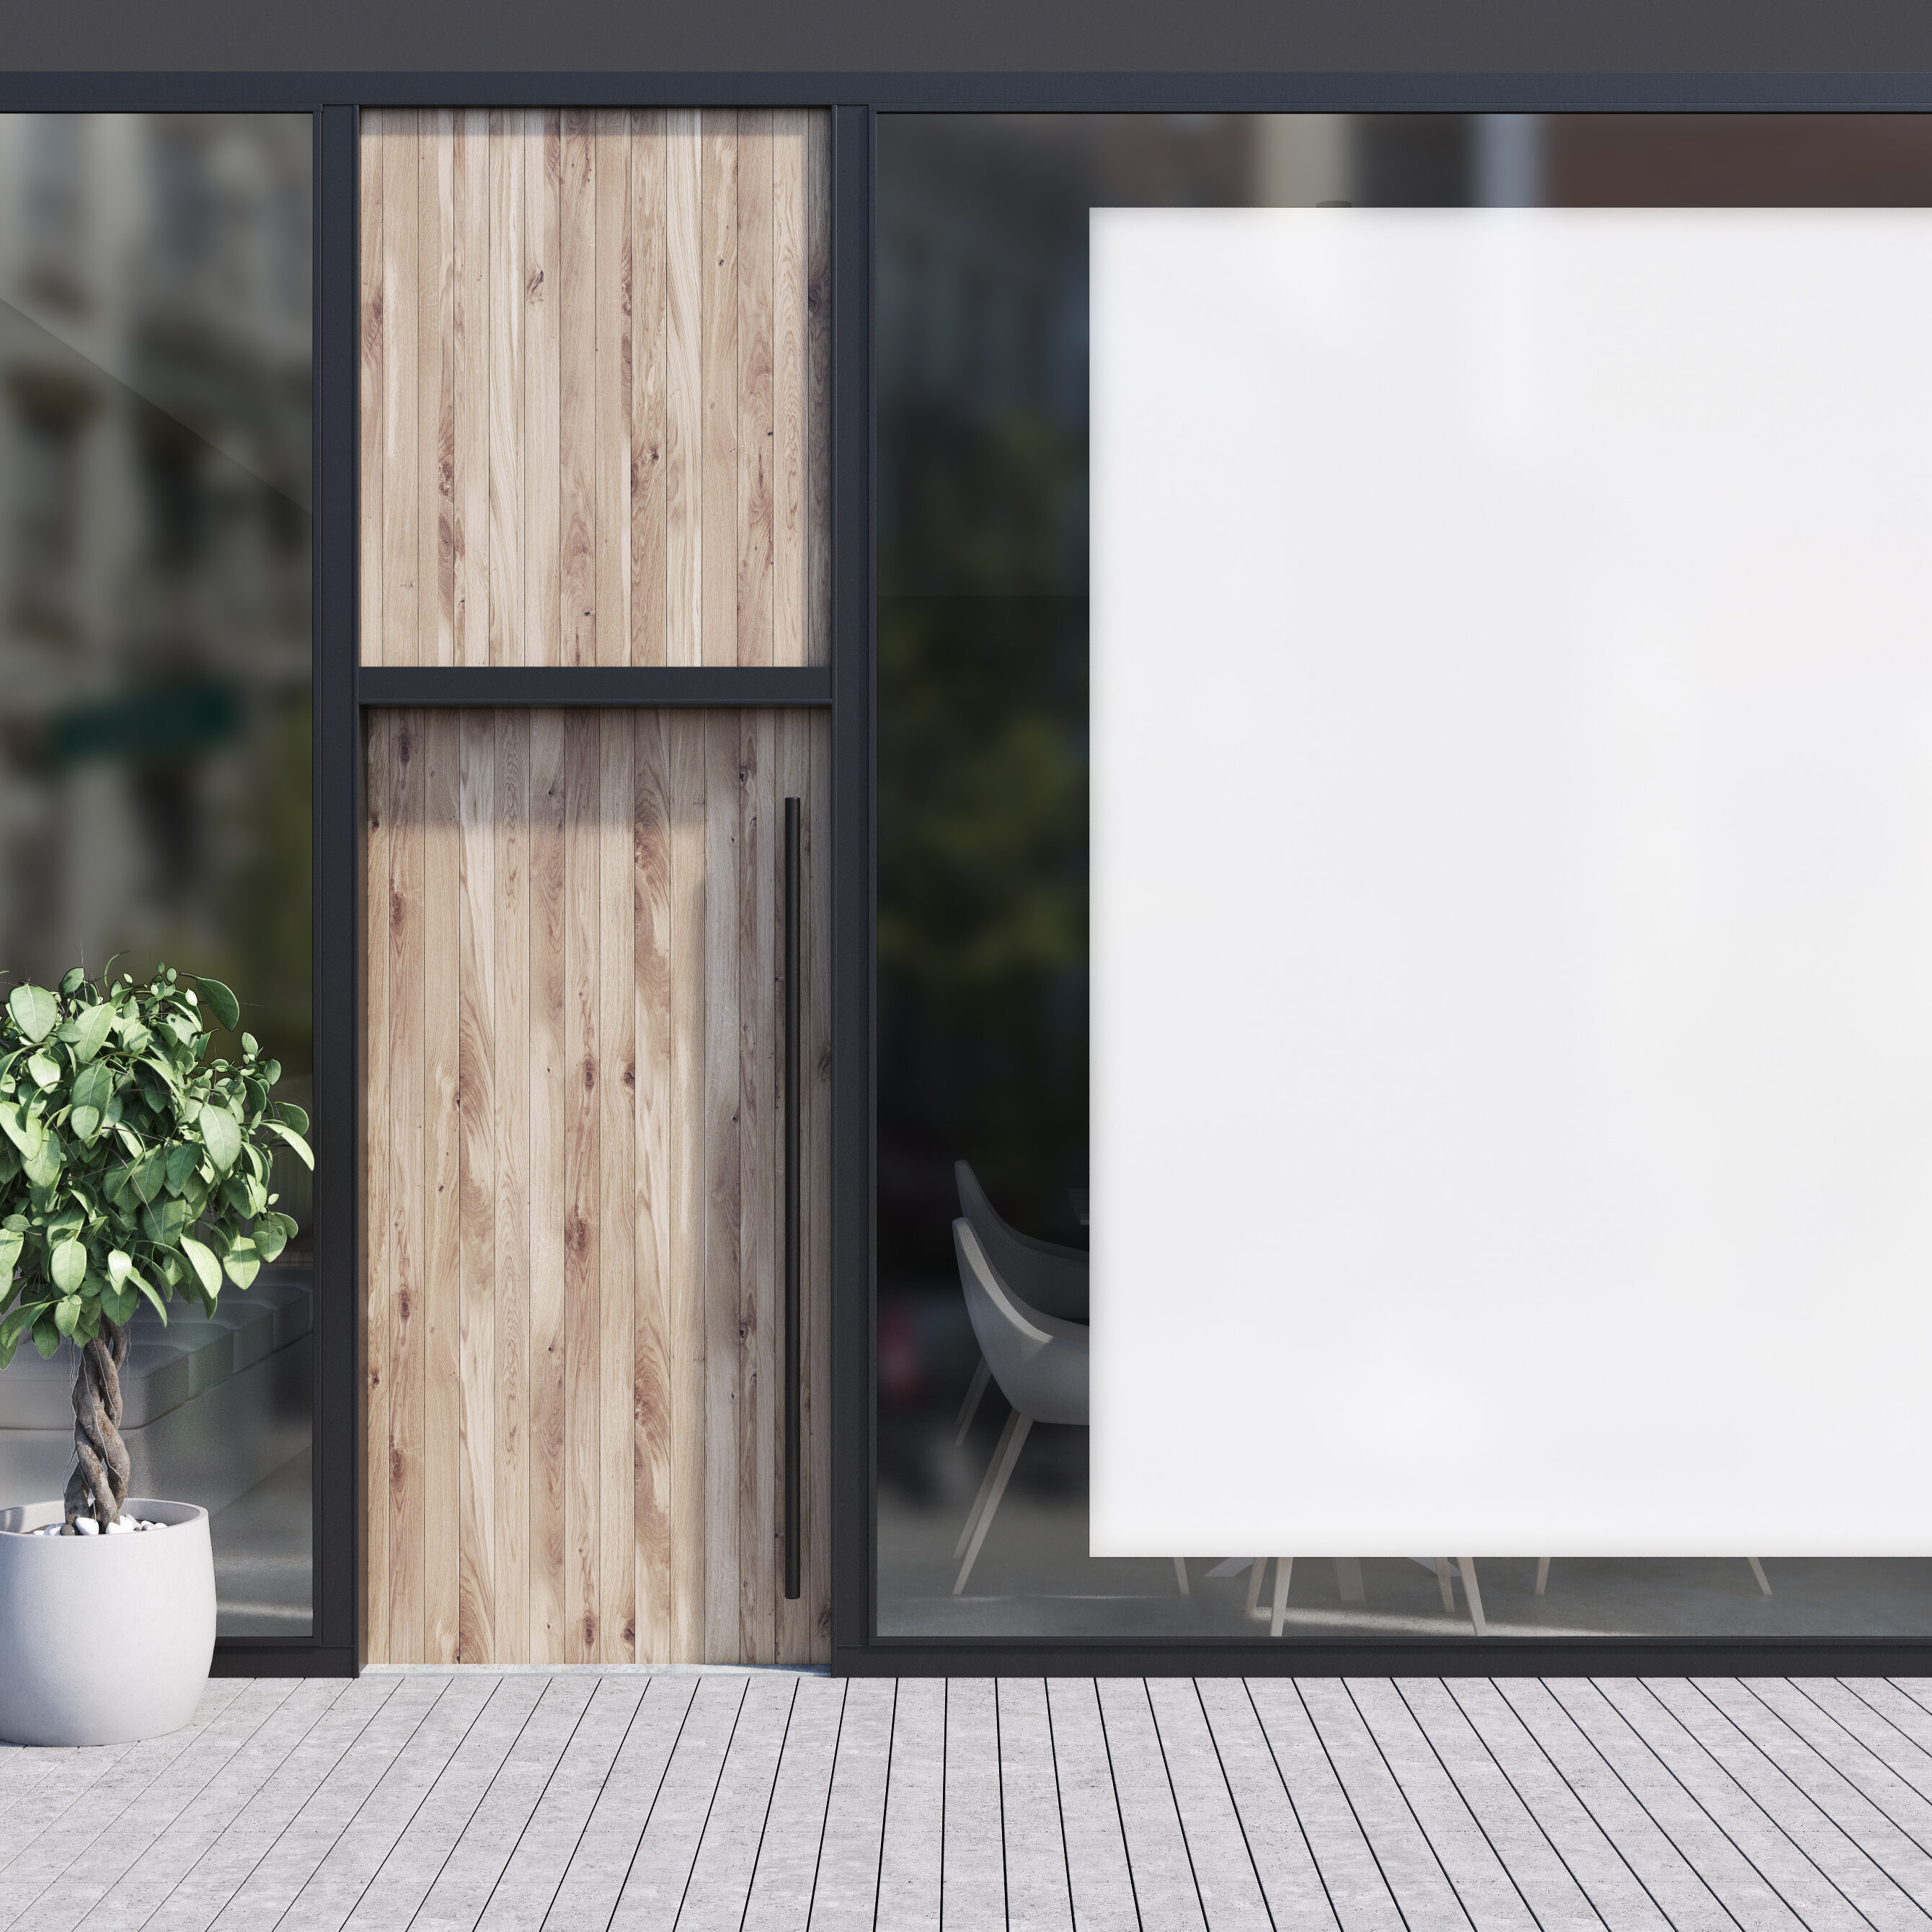 Modern cafe exterior with black walls, a wooden door, a huge vertical poster on a mirror like window and a potted tree near the entrance. 3d rendering mock up